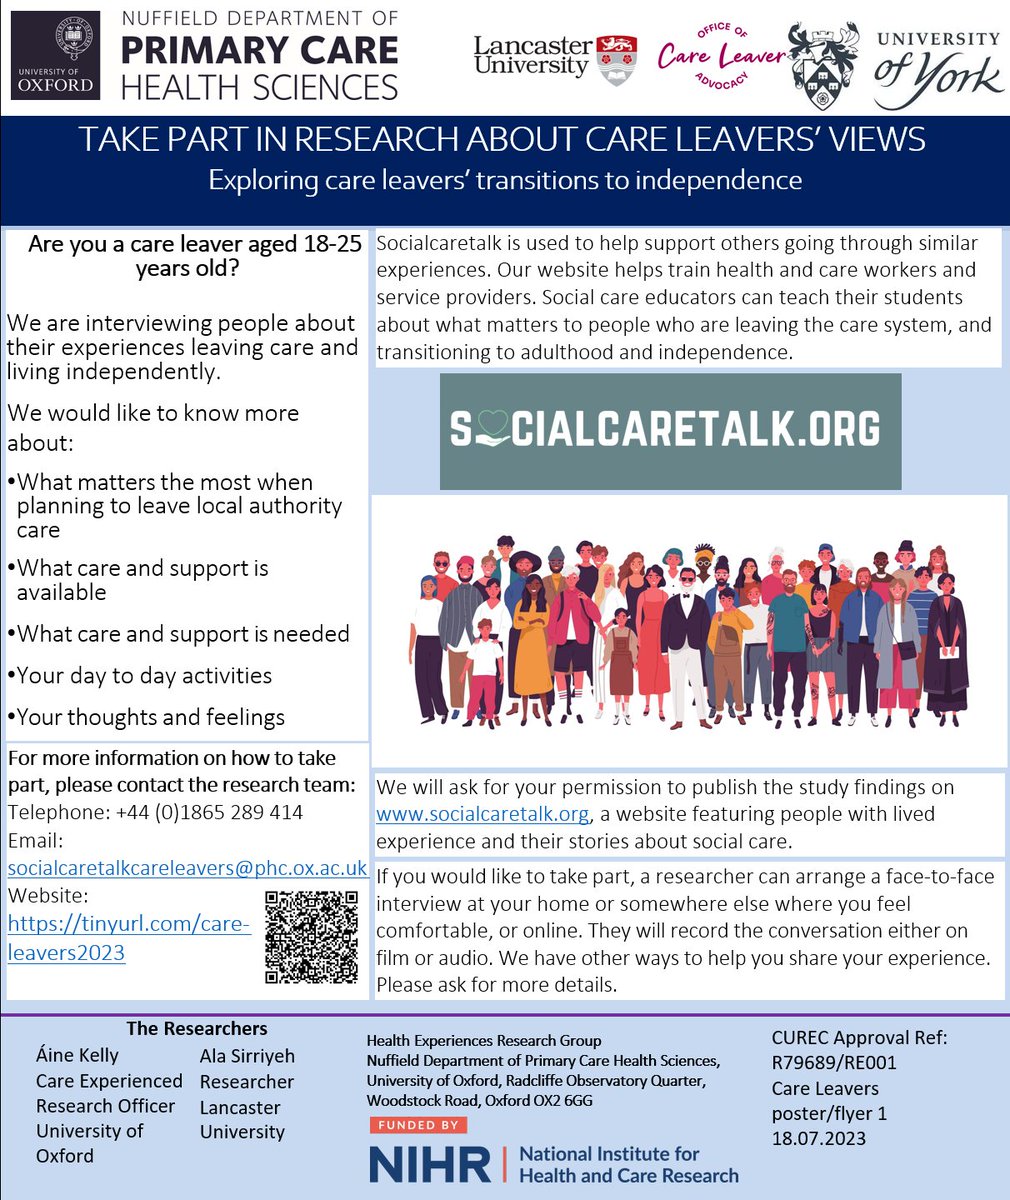 We are still recruiting for our #researchstudy about #careleavers and learning about their #livedexperience of #leavingcare. We look forward to hearing from you!  View the video here📽️ tinyurl.com/Care-Leaver-Re…